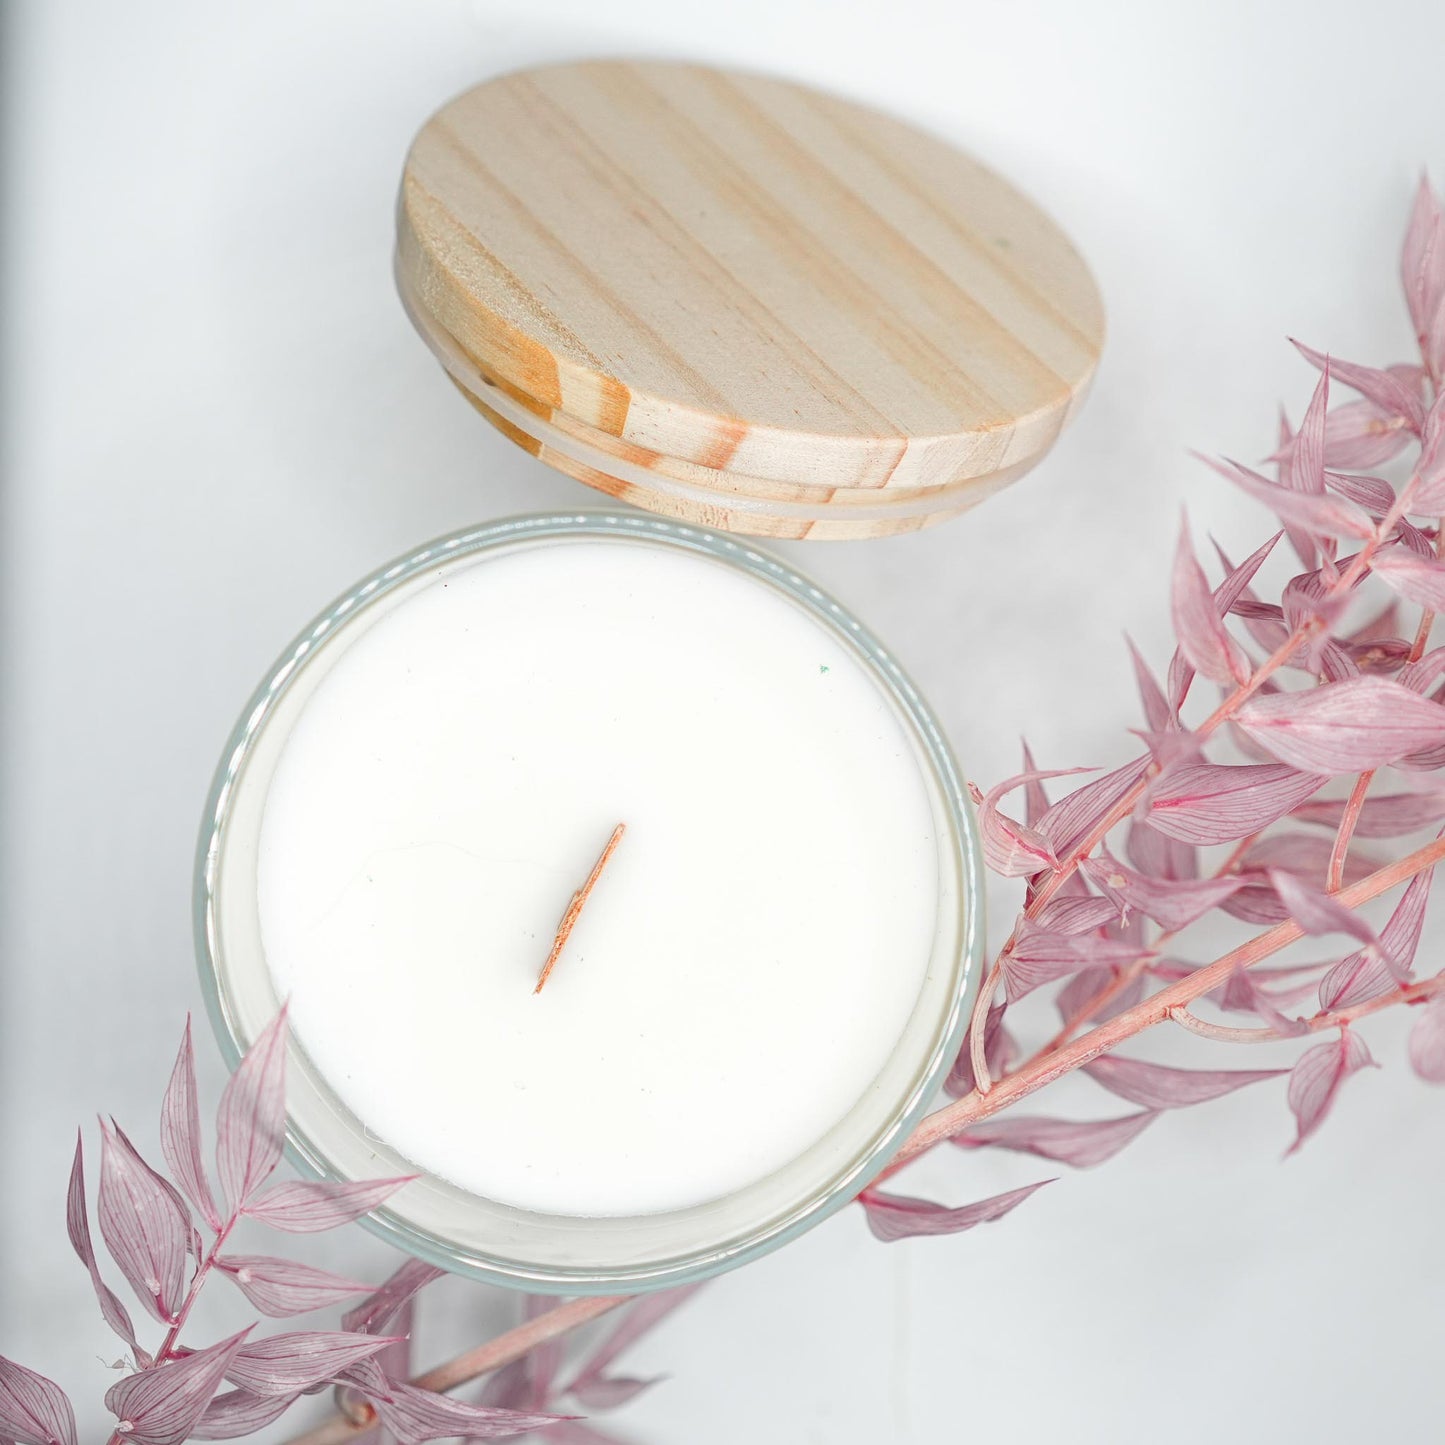 Crackling Woodwick Coconut Soy Candle